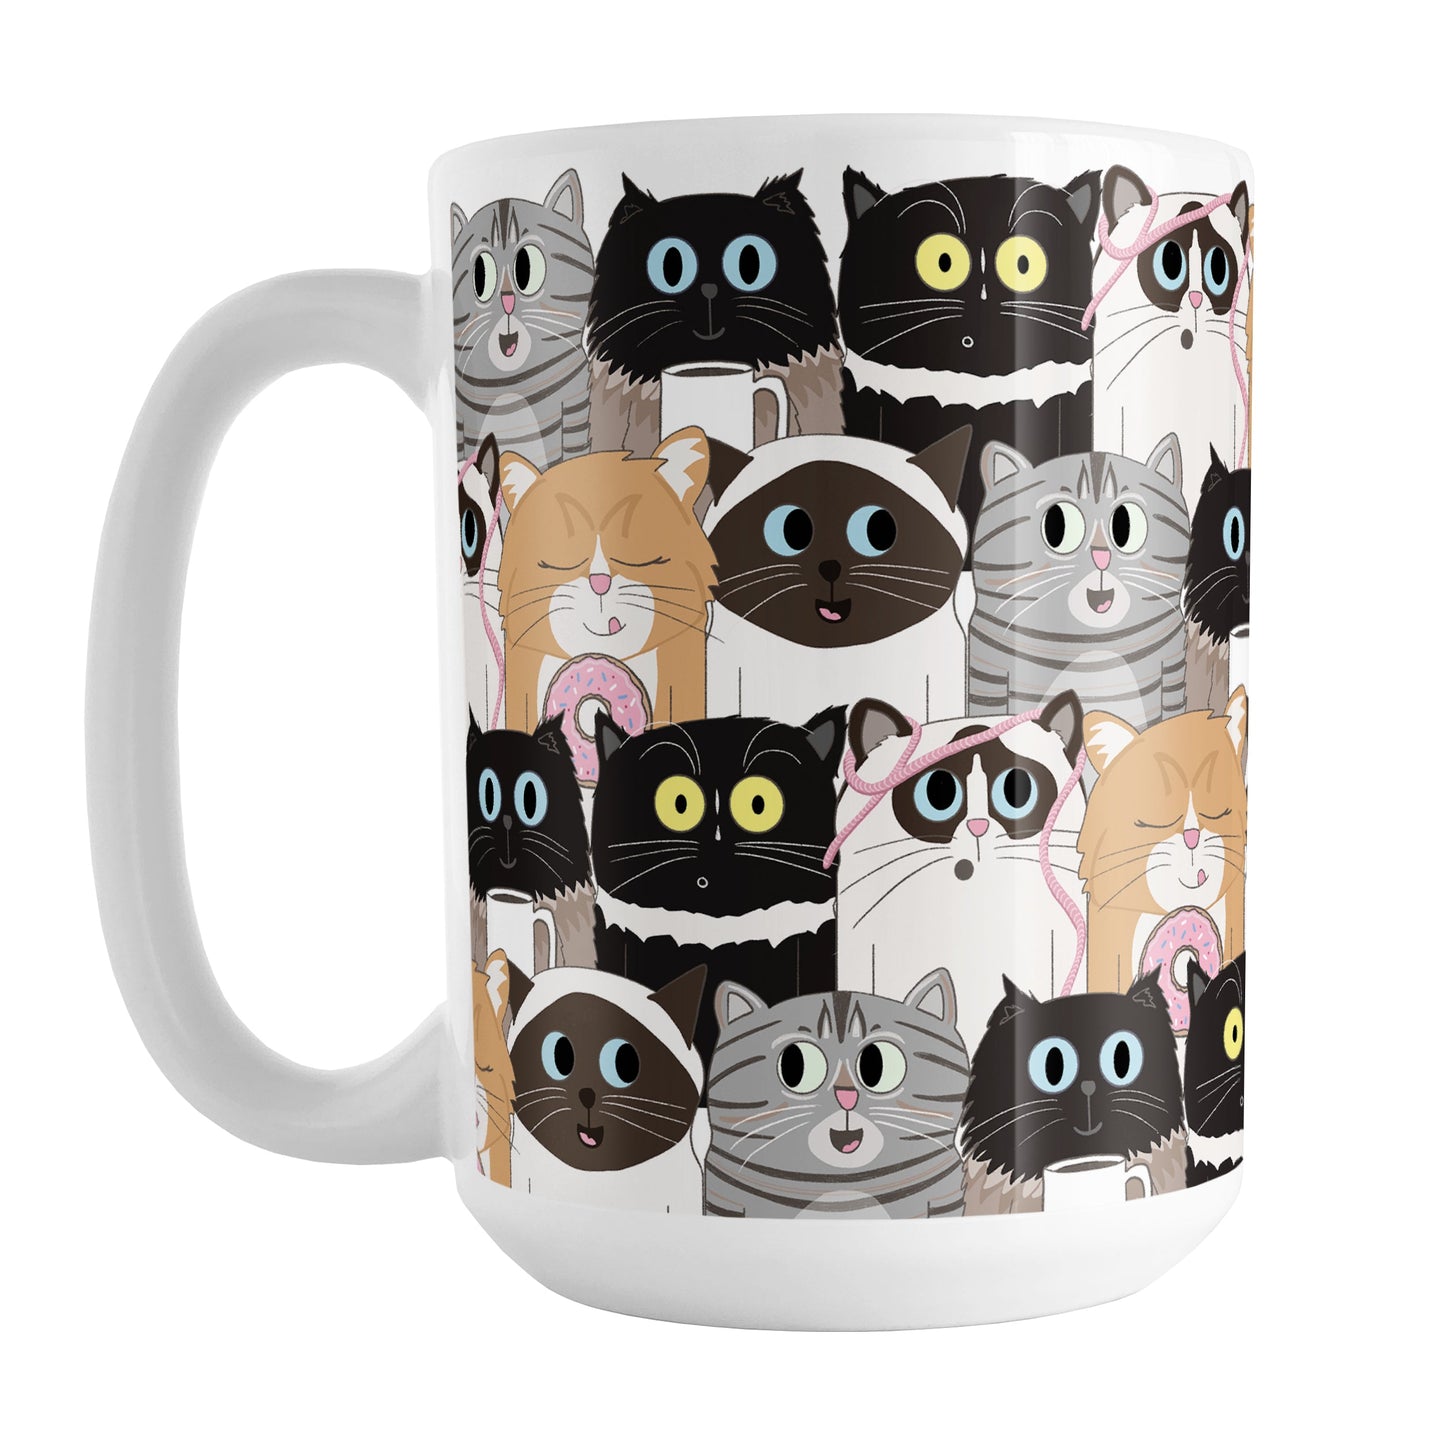 Cute Cat Stack Pattern Mug (15oz) at Amy's Coffee Mugs. Cute cats mug with an illustrated pattern of different breeds of cats with different fun expressions, with yarn, coffee, and donuts. This stacked pattern of cats wraps around the ceramic mug to the handle.